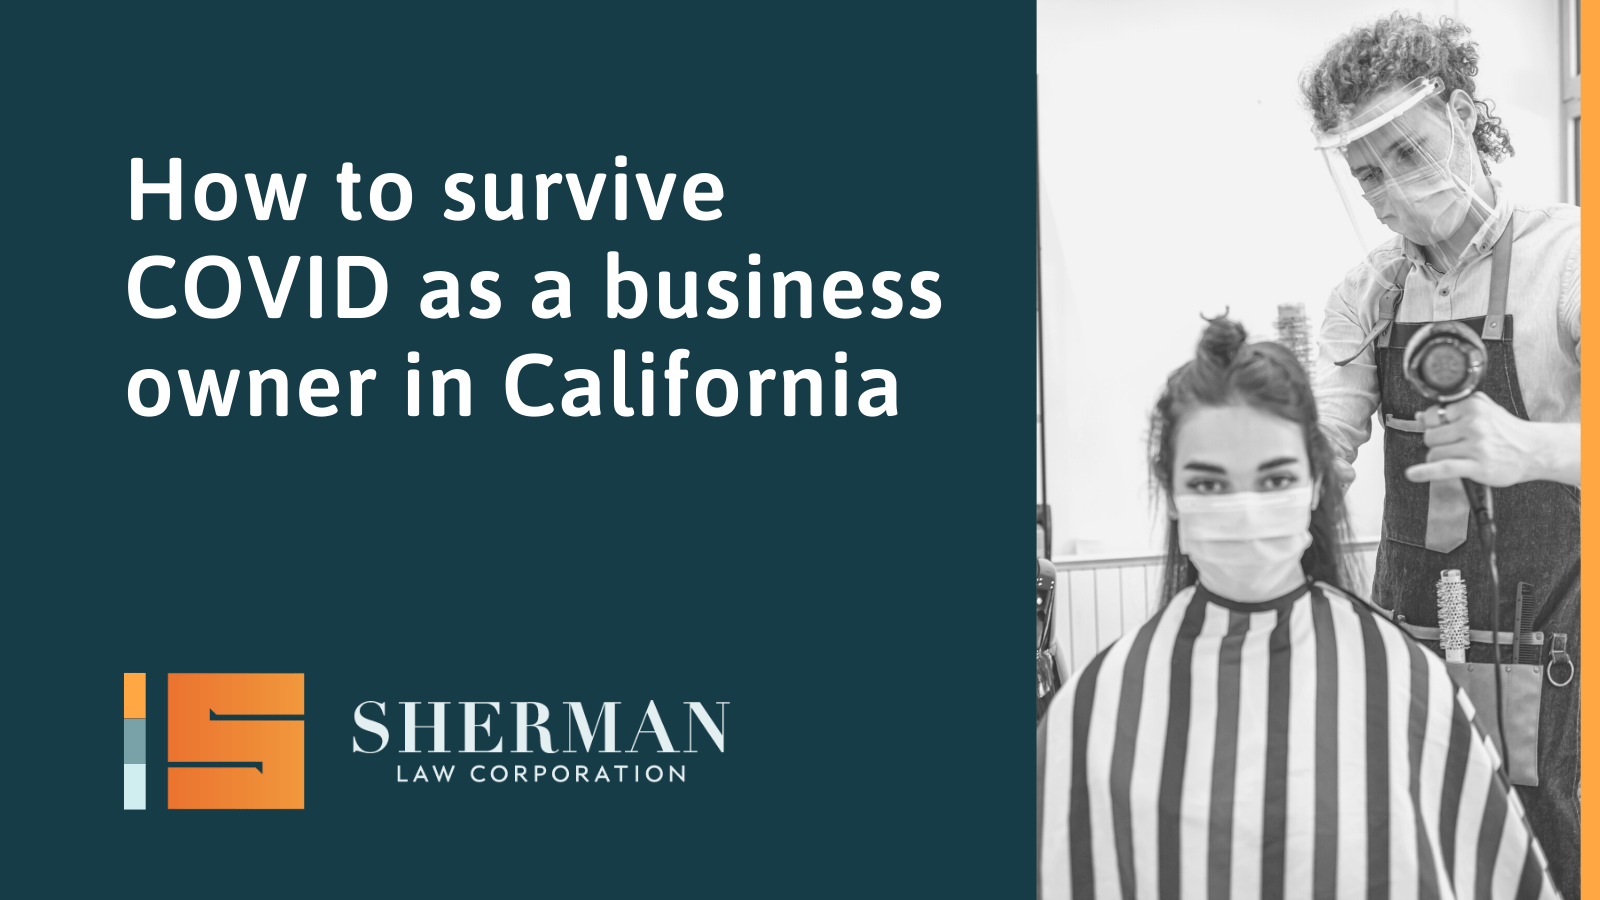 How to survive COVID as a business owner in California - sherman law corporation